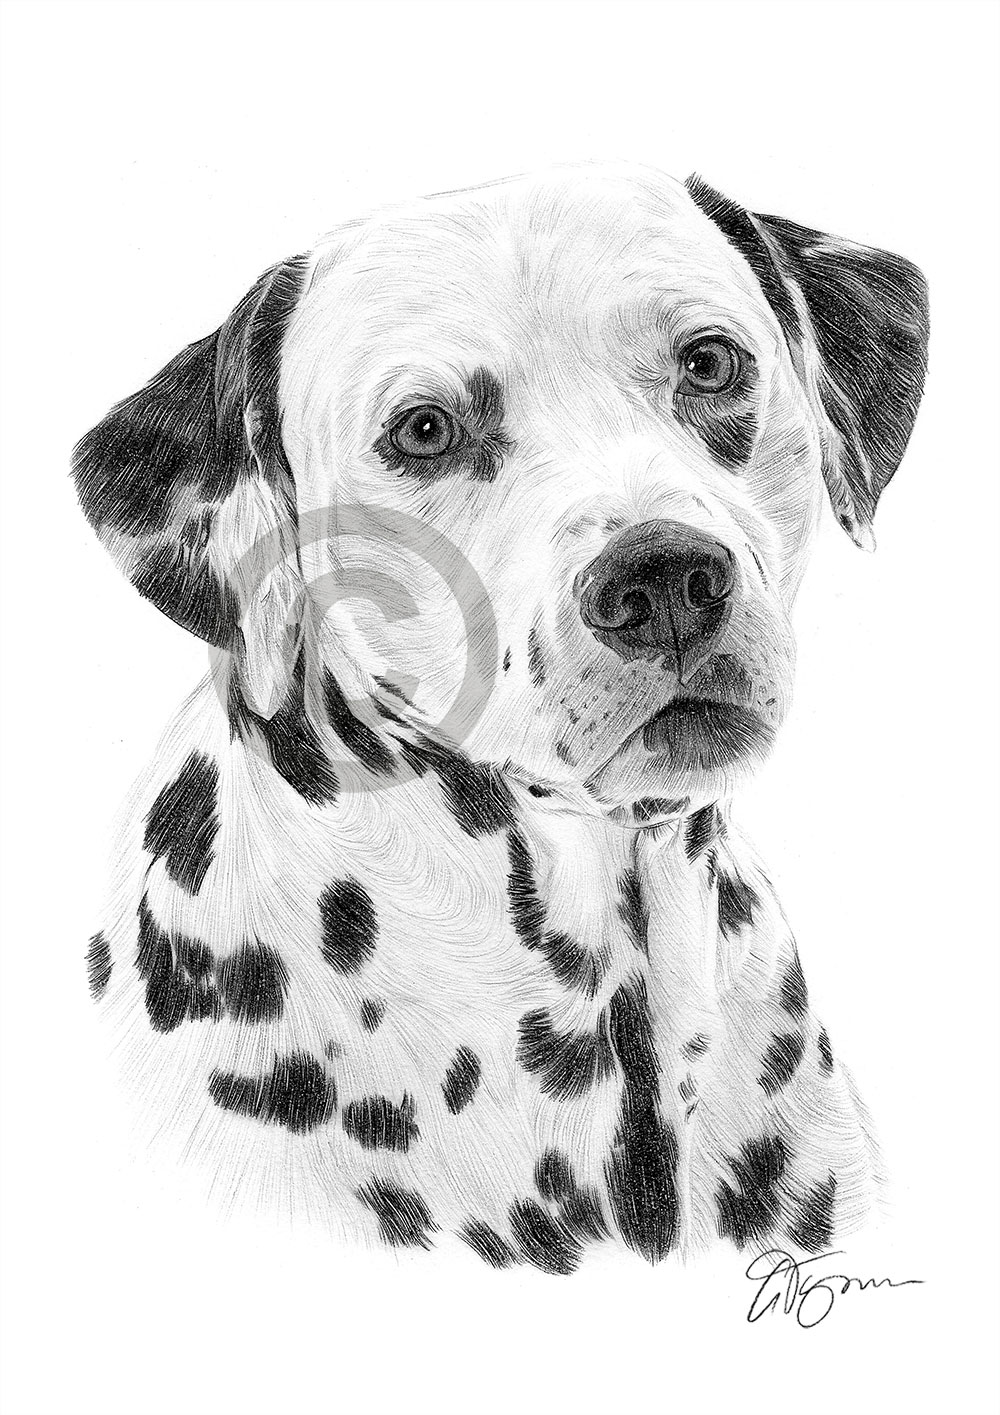 Pencil drawing of a Dalmation by artist Gary Tymon